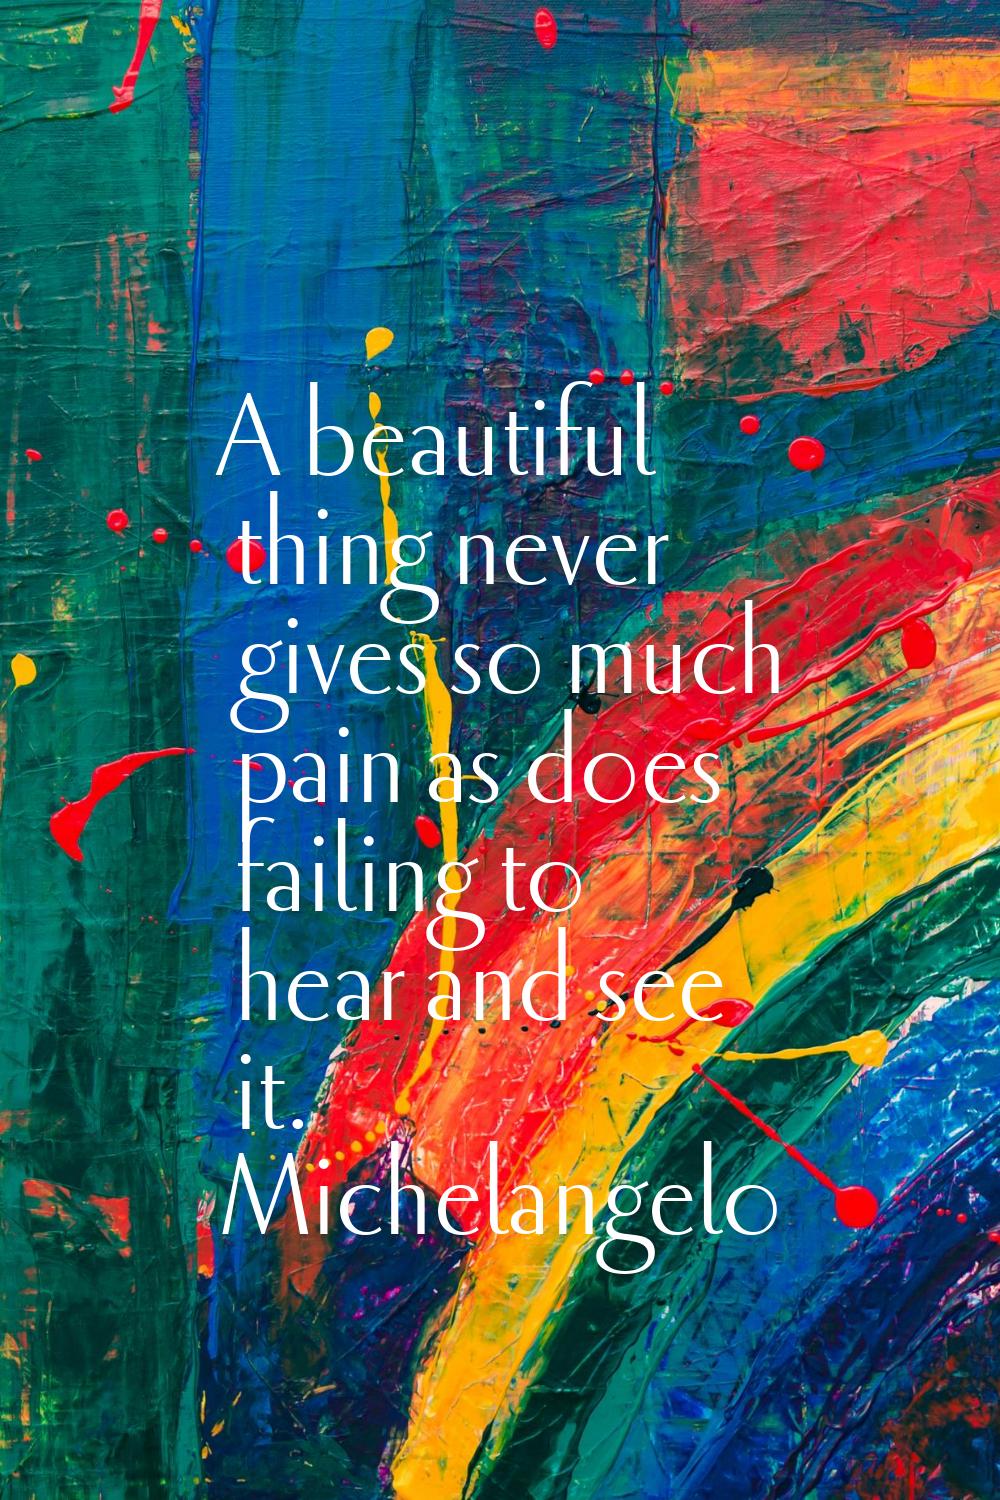 A beautiful thing never gives so much pain as does failing to hear and see it.